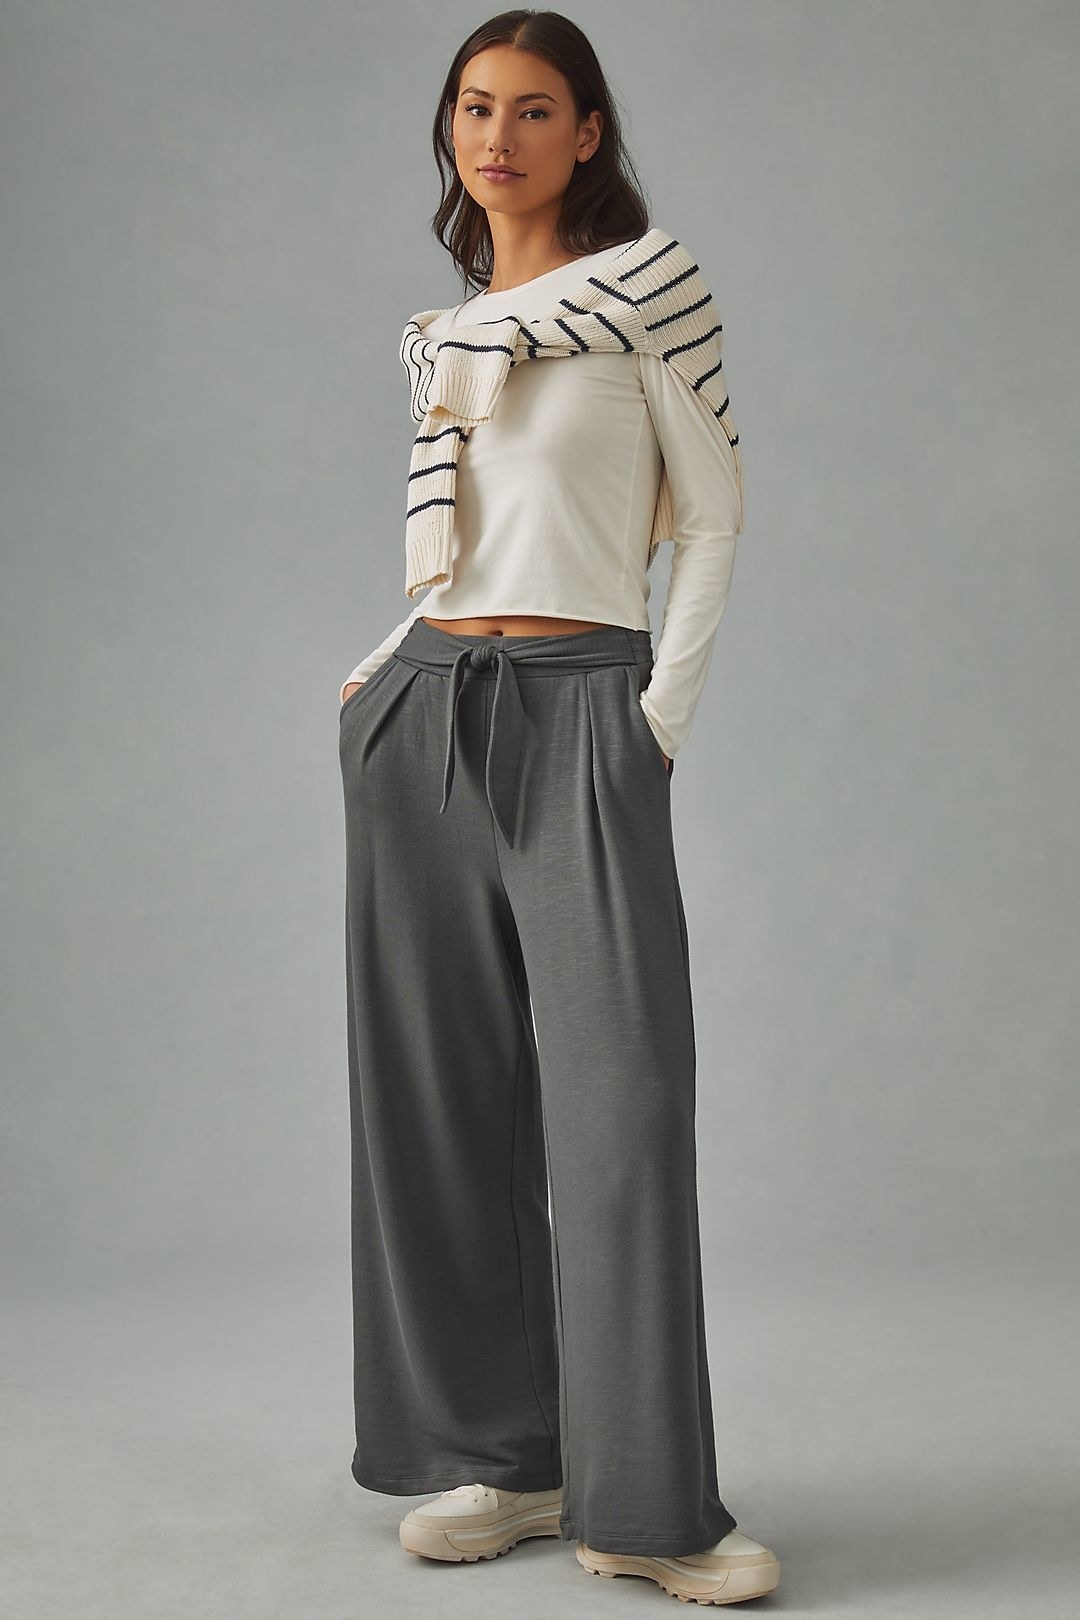 model in wide-legged grey pants with a short tie at the waist